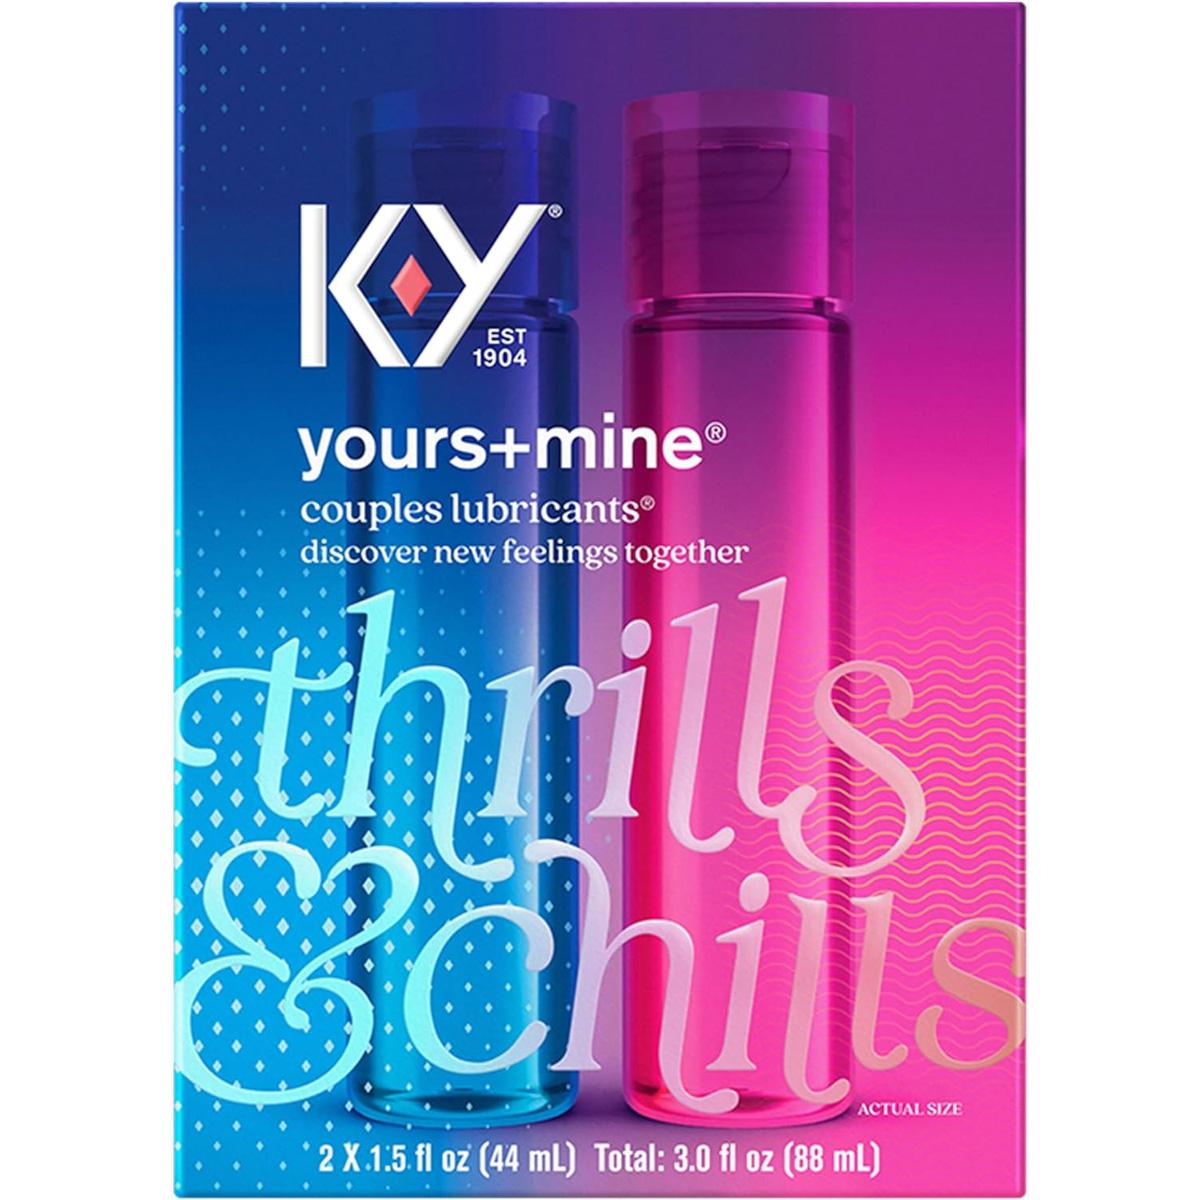 K-Y Yours + Mine Couples Personal Lube for $8.33